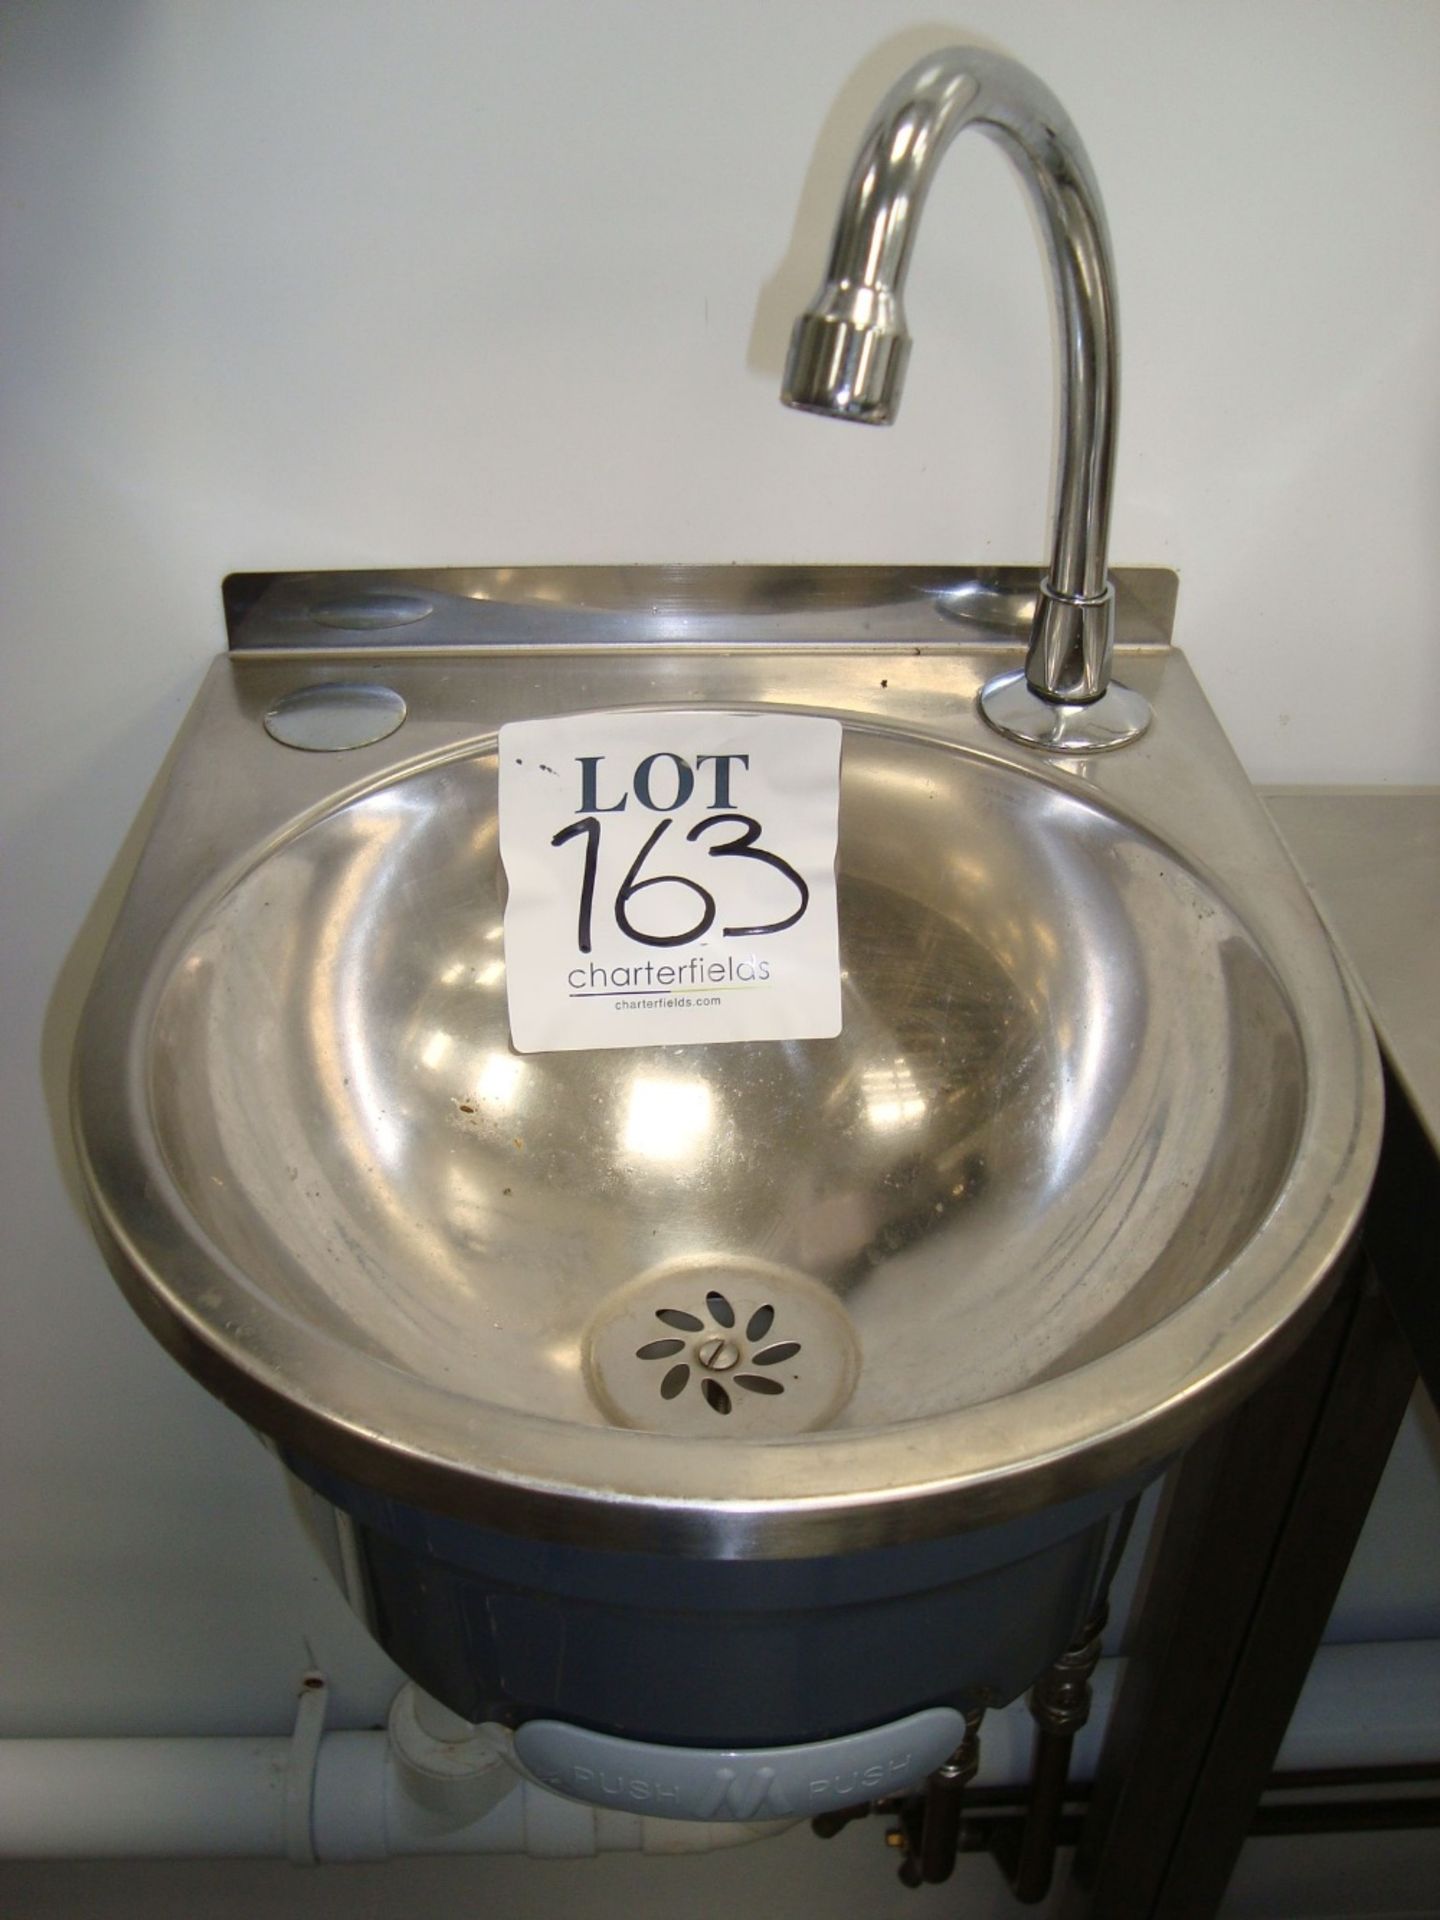 A stainless steel hand wash basin